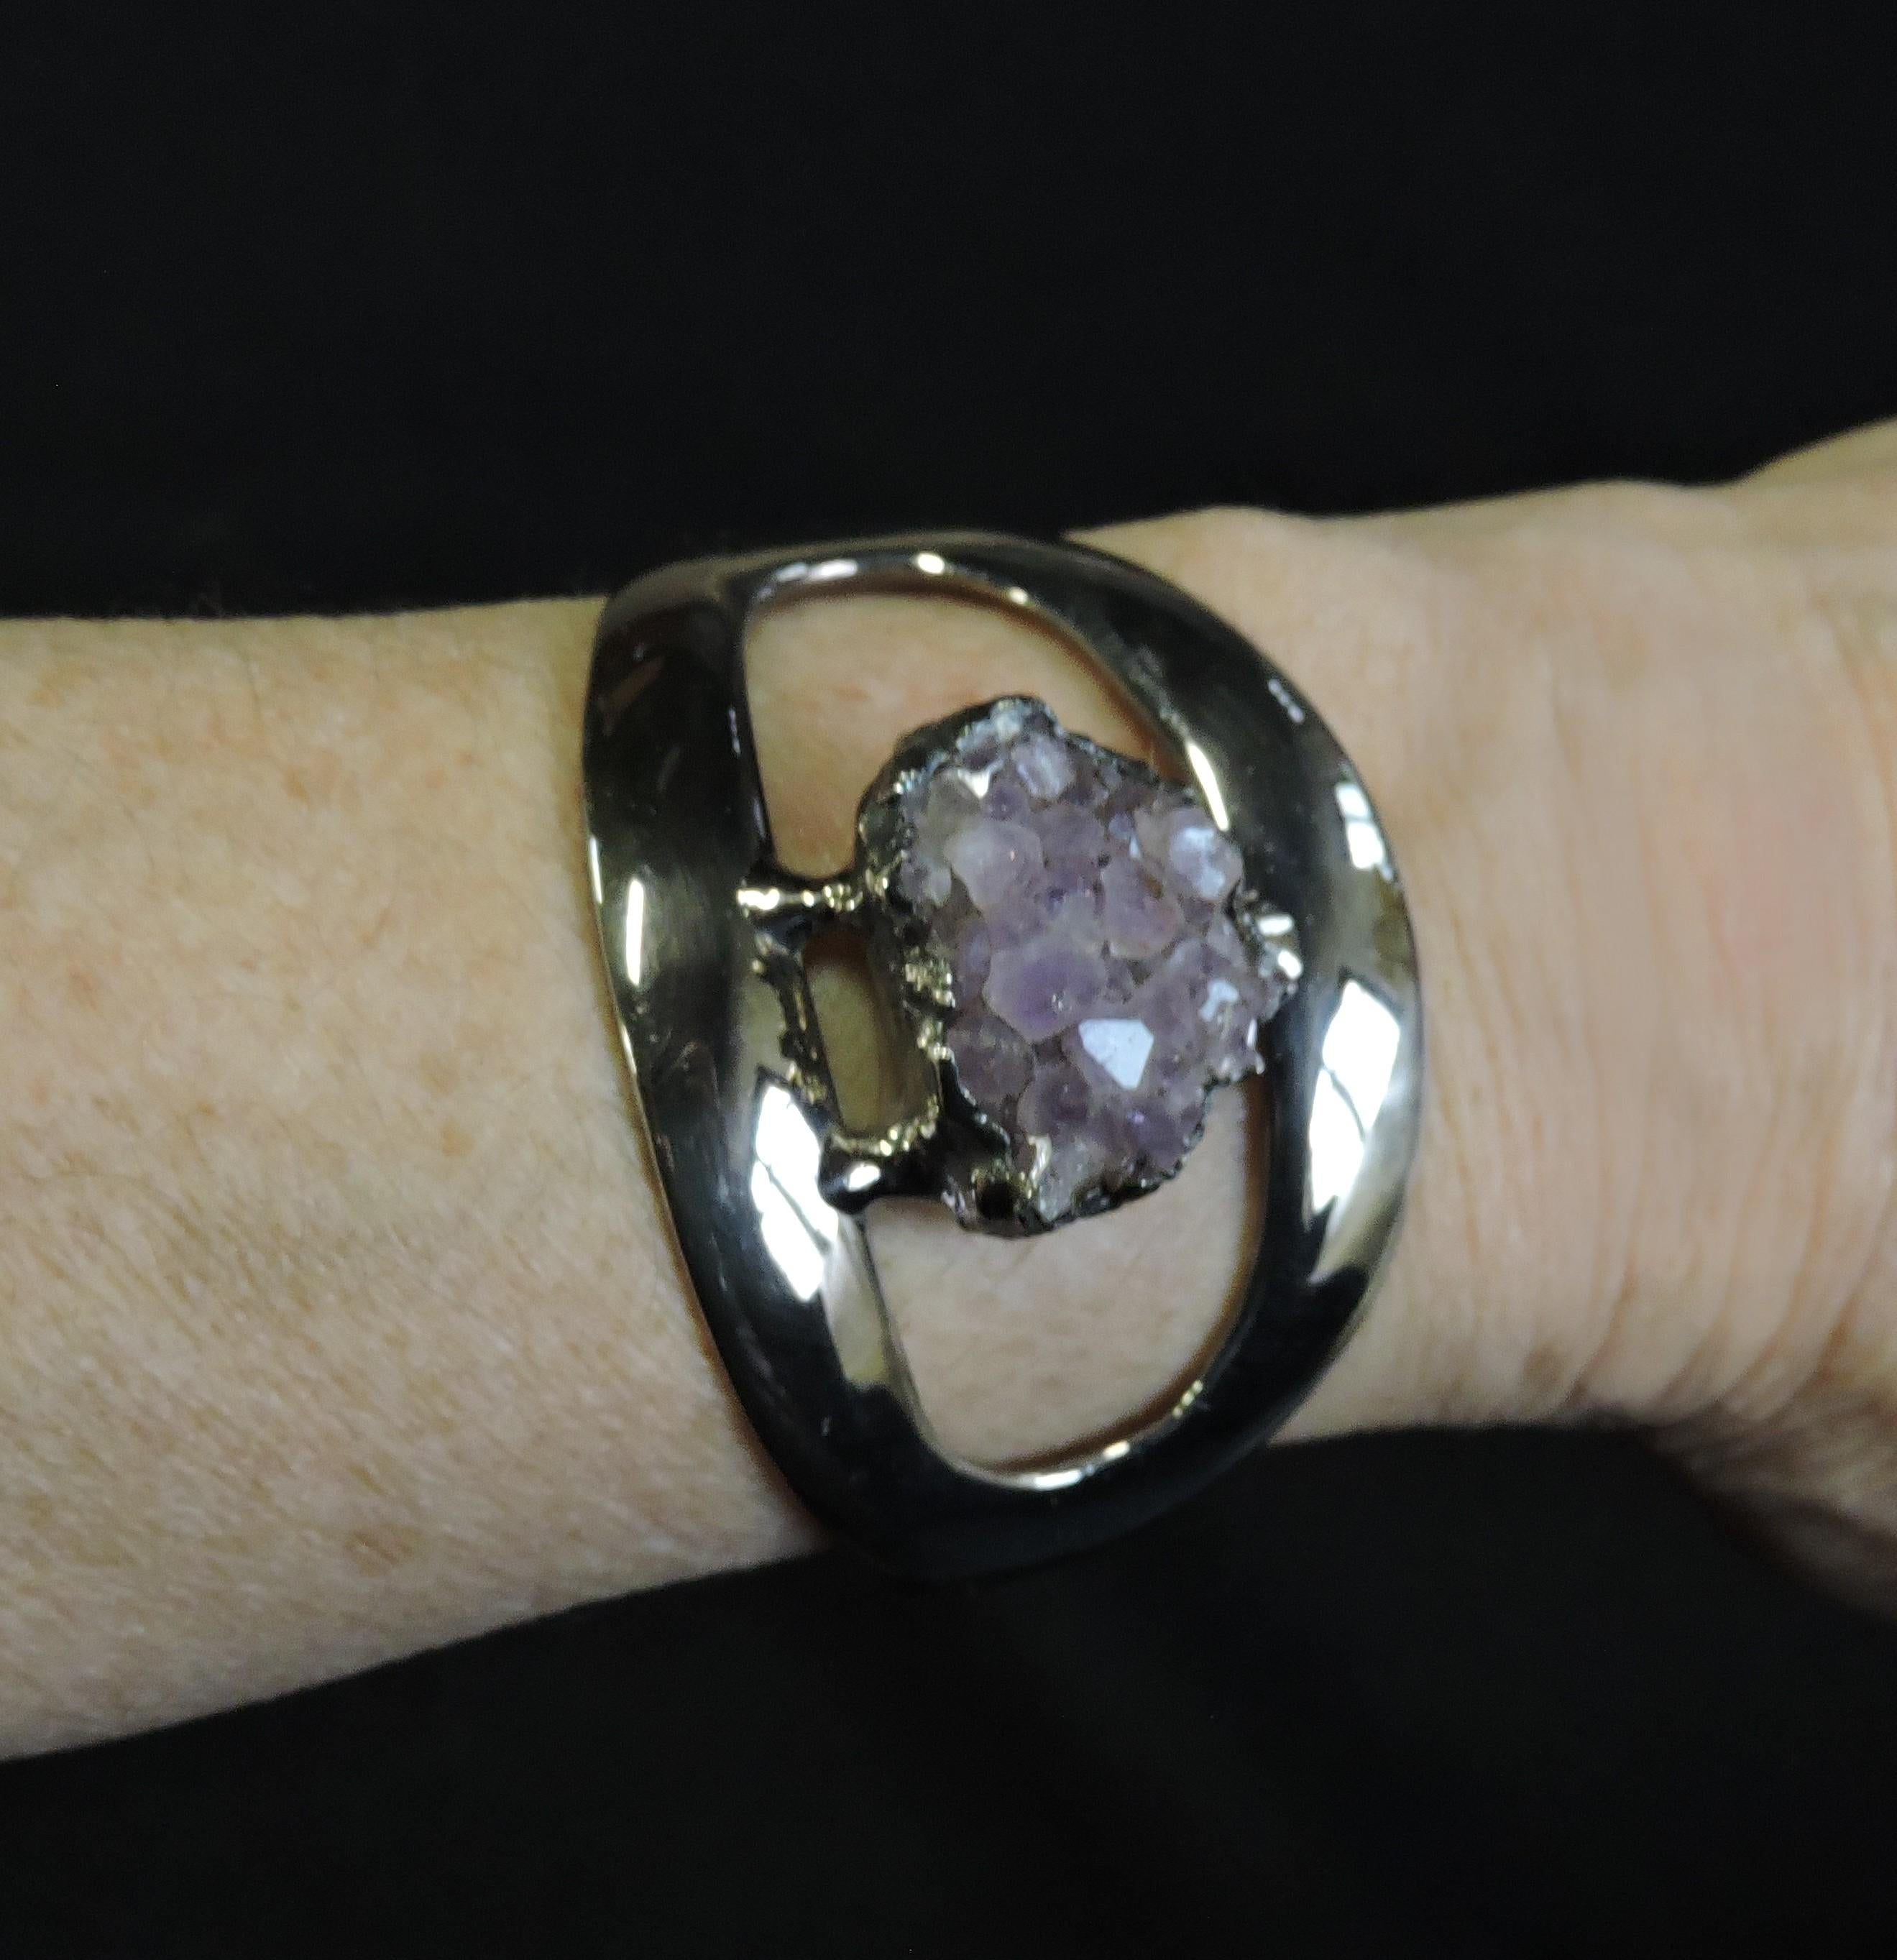 Striking sculptural brutalist style cuff bracelet by acclaimed Danish artist, Jacob Hull. This piece is silver plated with a raw amethyst in the center. It measures about 2.25 inches from side to side, and is adjustable. Marked Jacob Hull, Denmark,